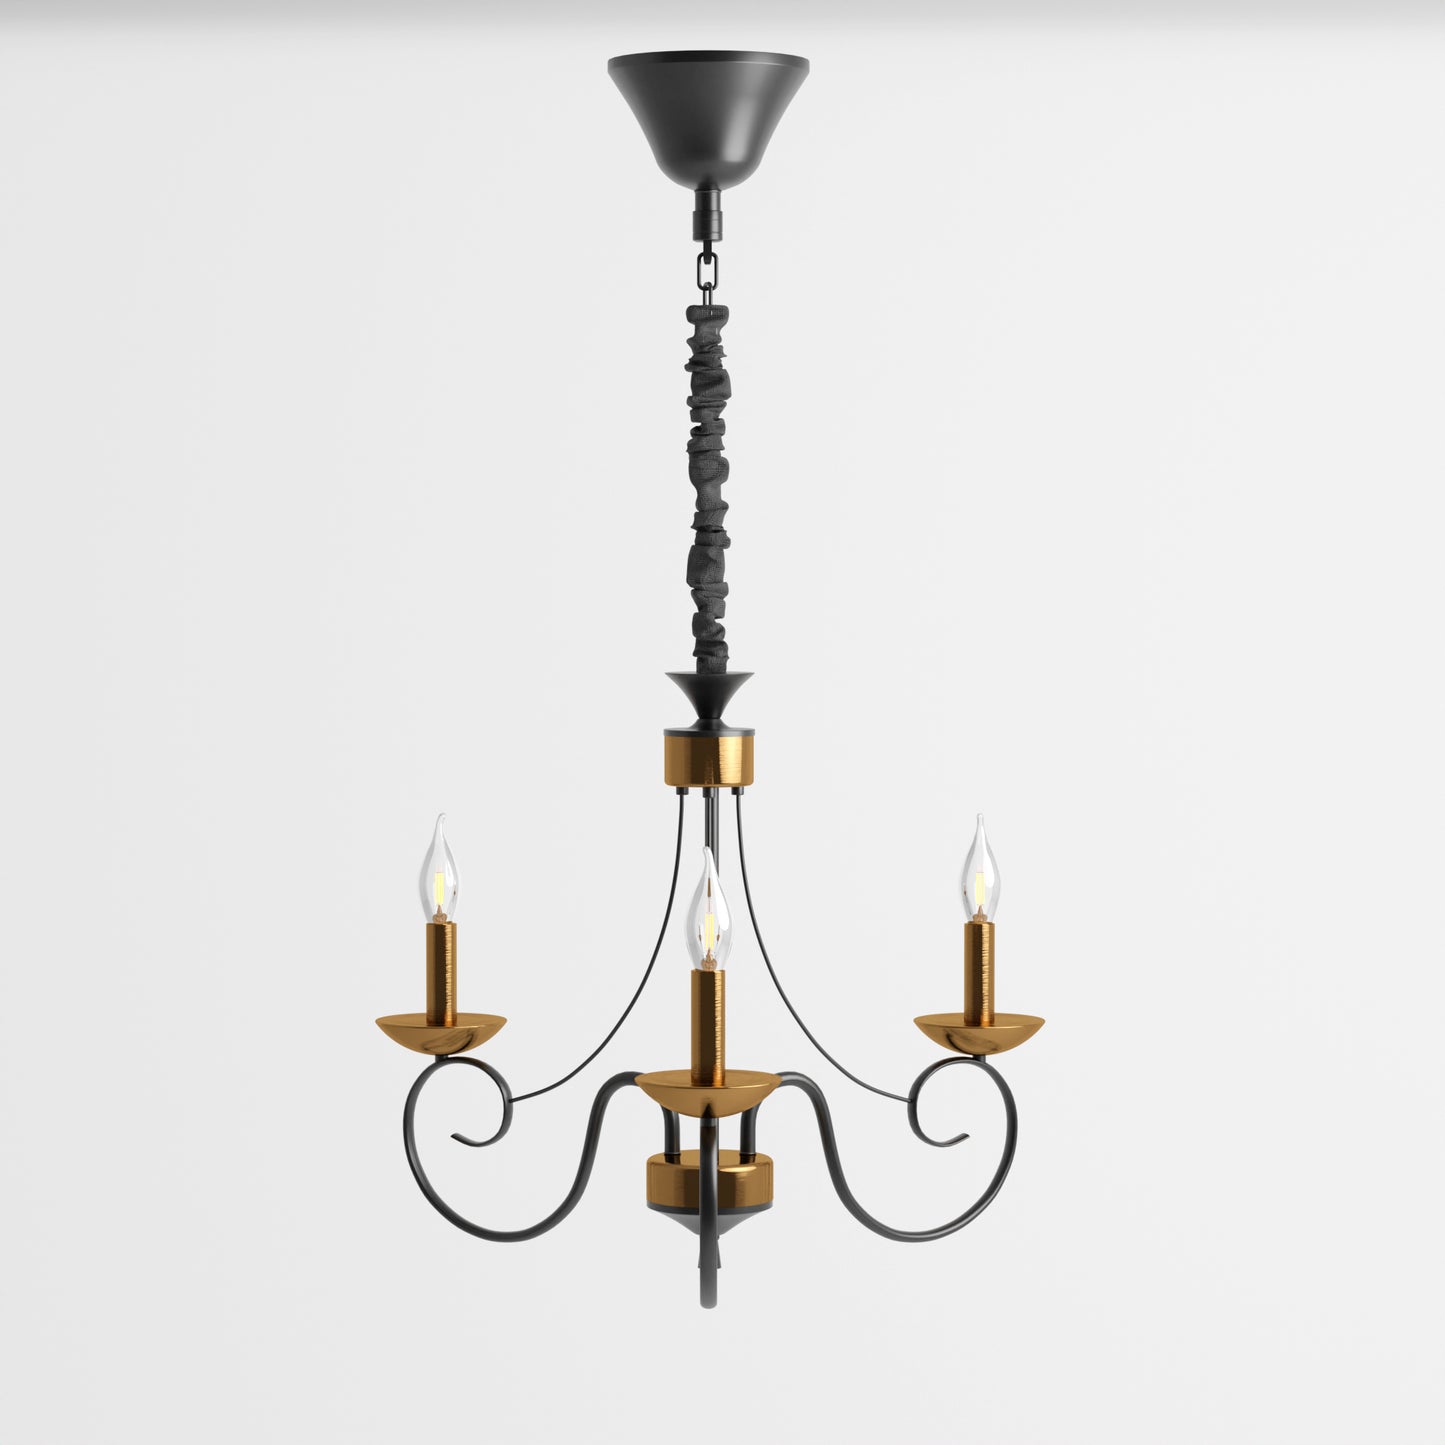 5/3 Arm Candle Light with Adjustable chain Traditional Design Ceiling Pendant light~3629